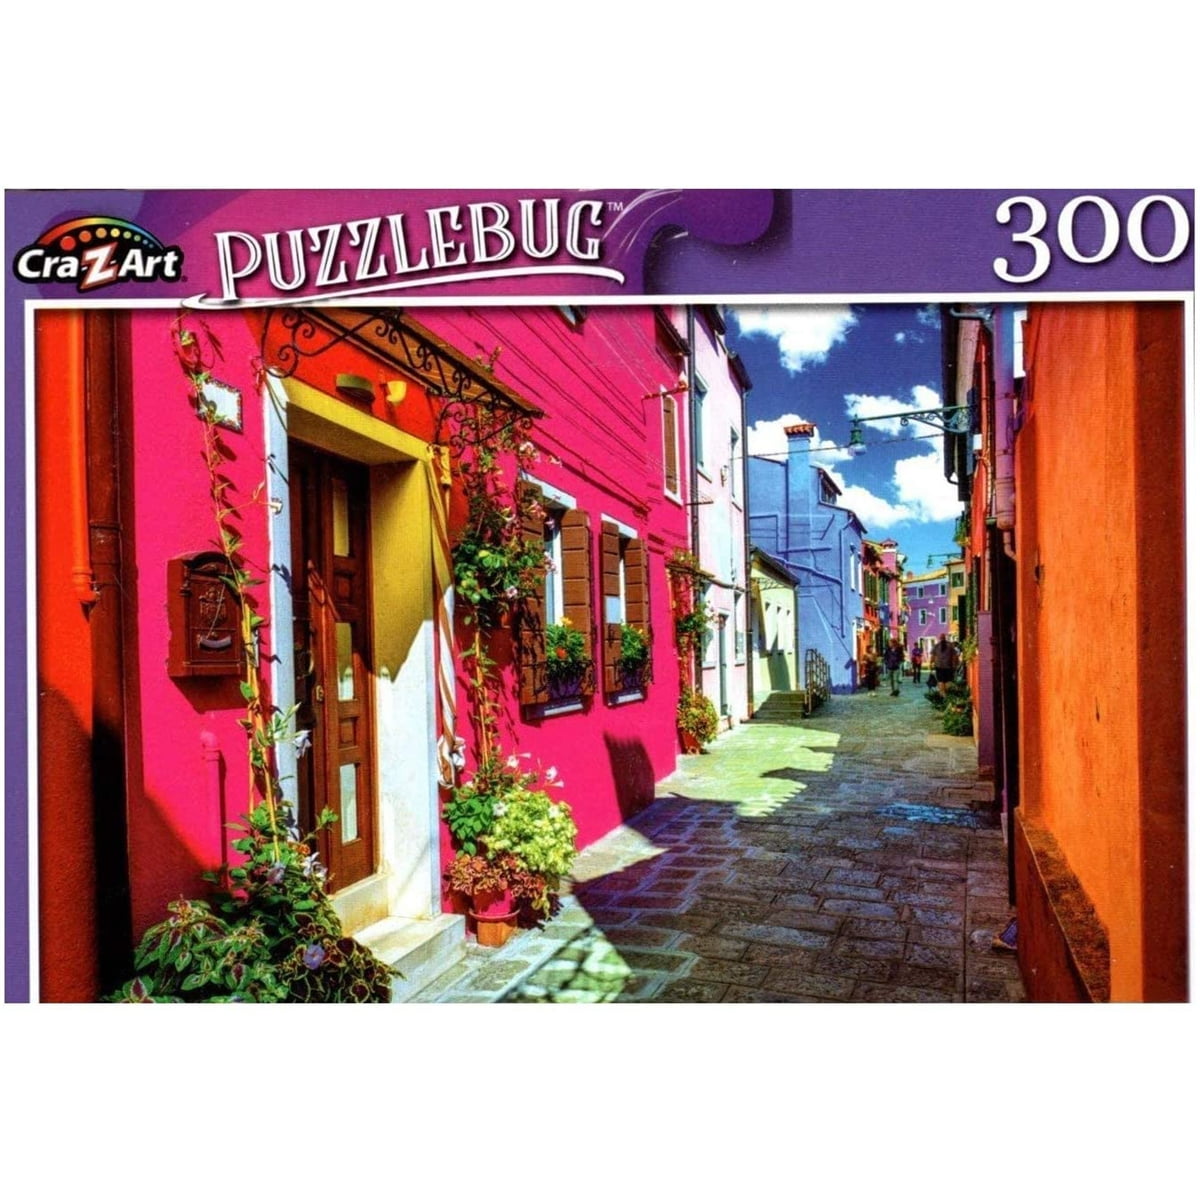 Pink Building 300 Jigsaw Puzzle New Home Activity Burano Island Venice Italy 